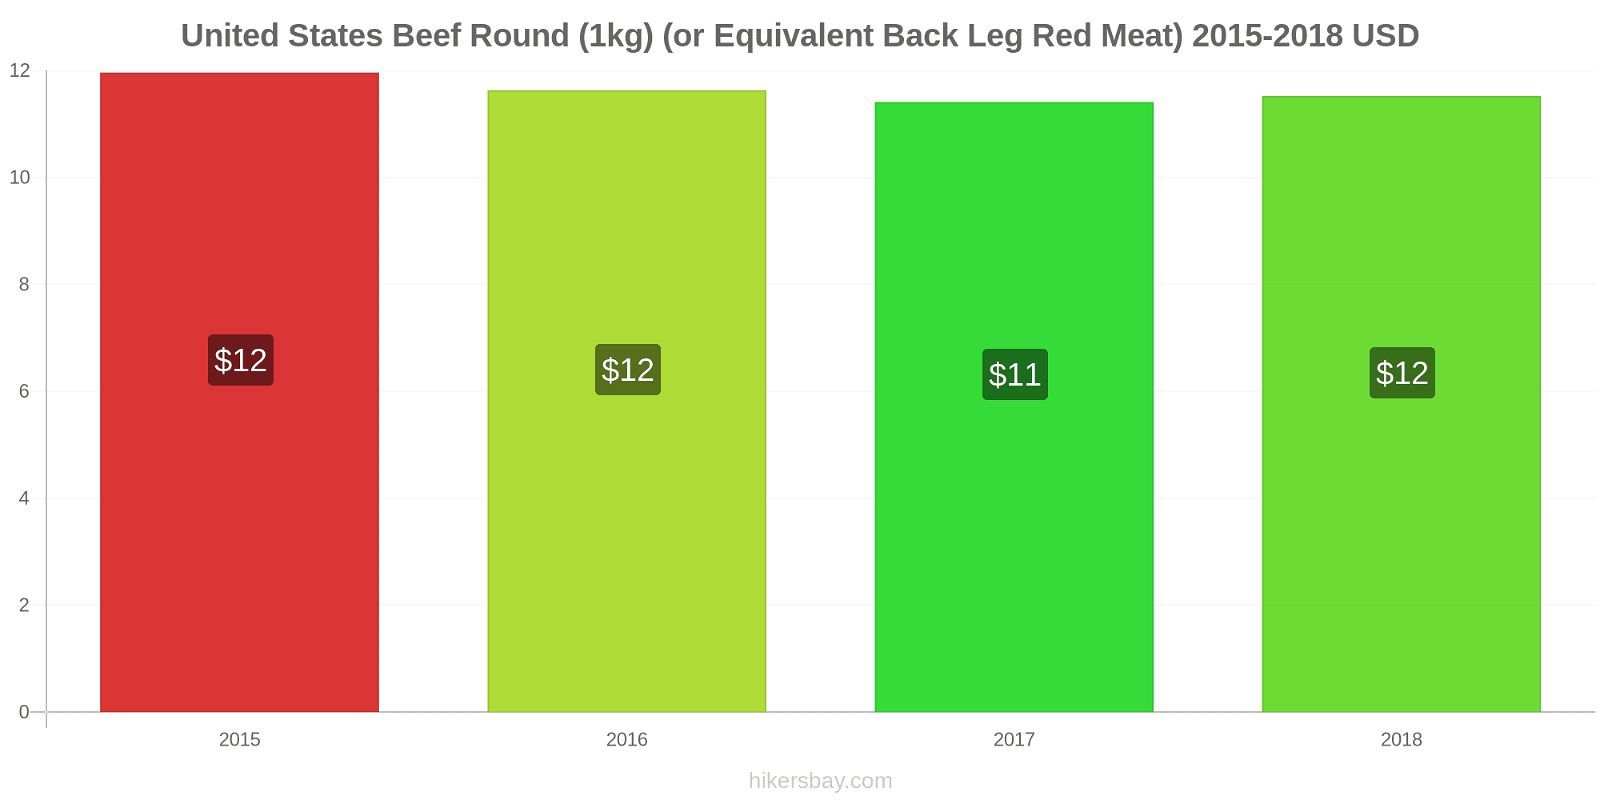 United States price changes Beef (1kg) (or similar red meat) hikersbay.com